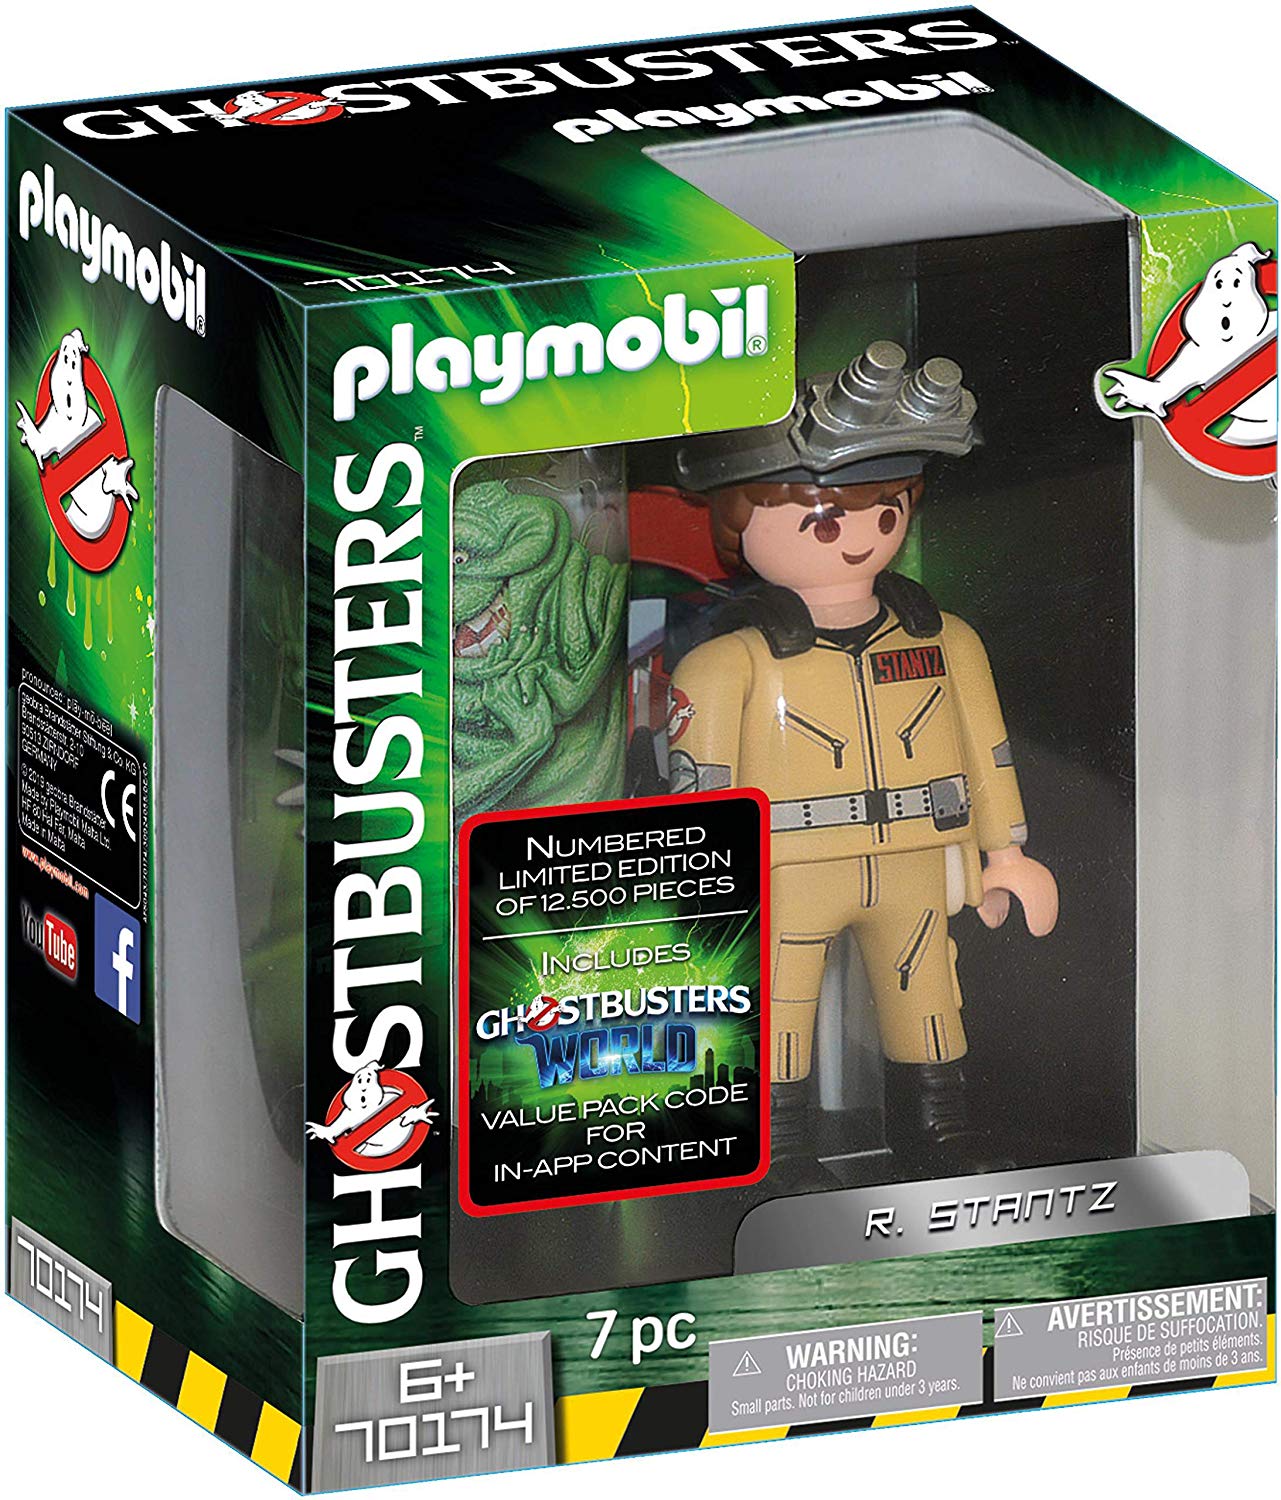 Playmobil 70174 Ghostbusters Collectable Figurine R. Stantz Multi-Coloured